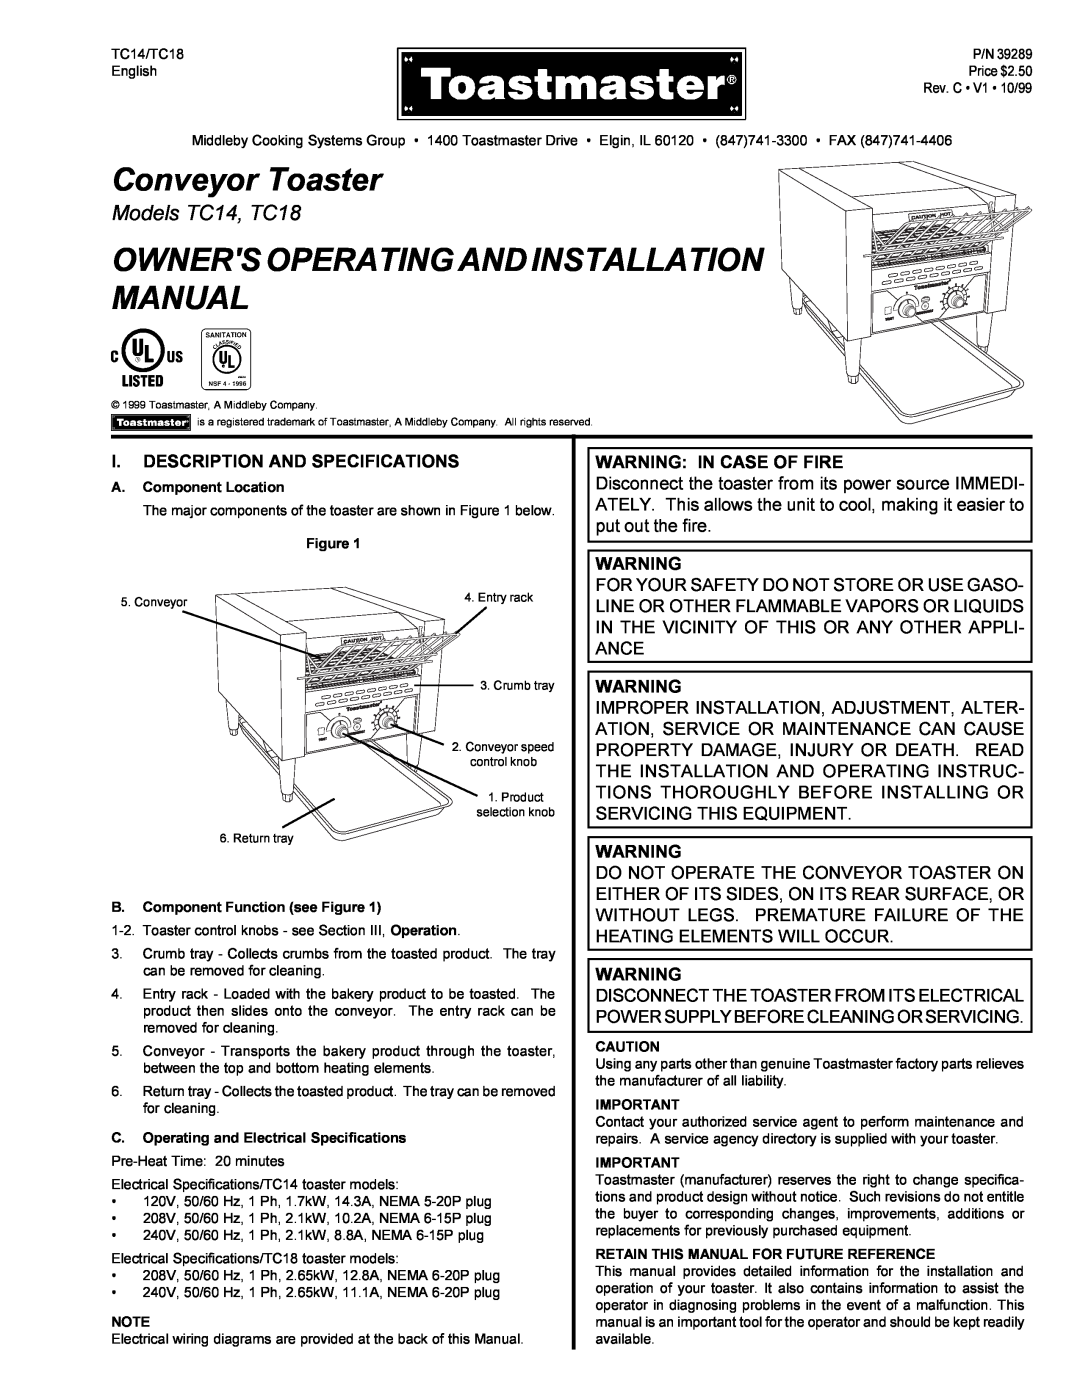 Toastmaster TC14 installation manual Conveyor Toaster, Owners Operating And Installation Manual, Warning In Case Of Fire 